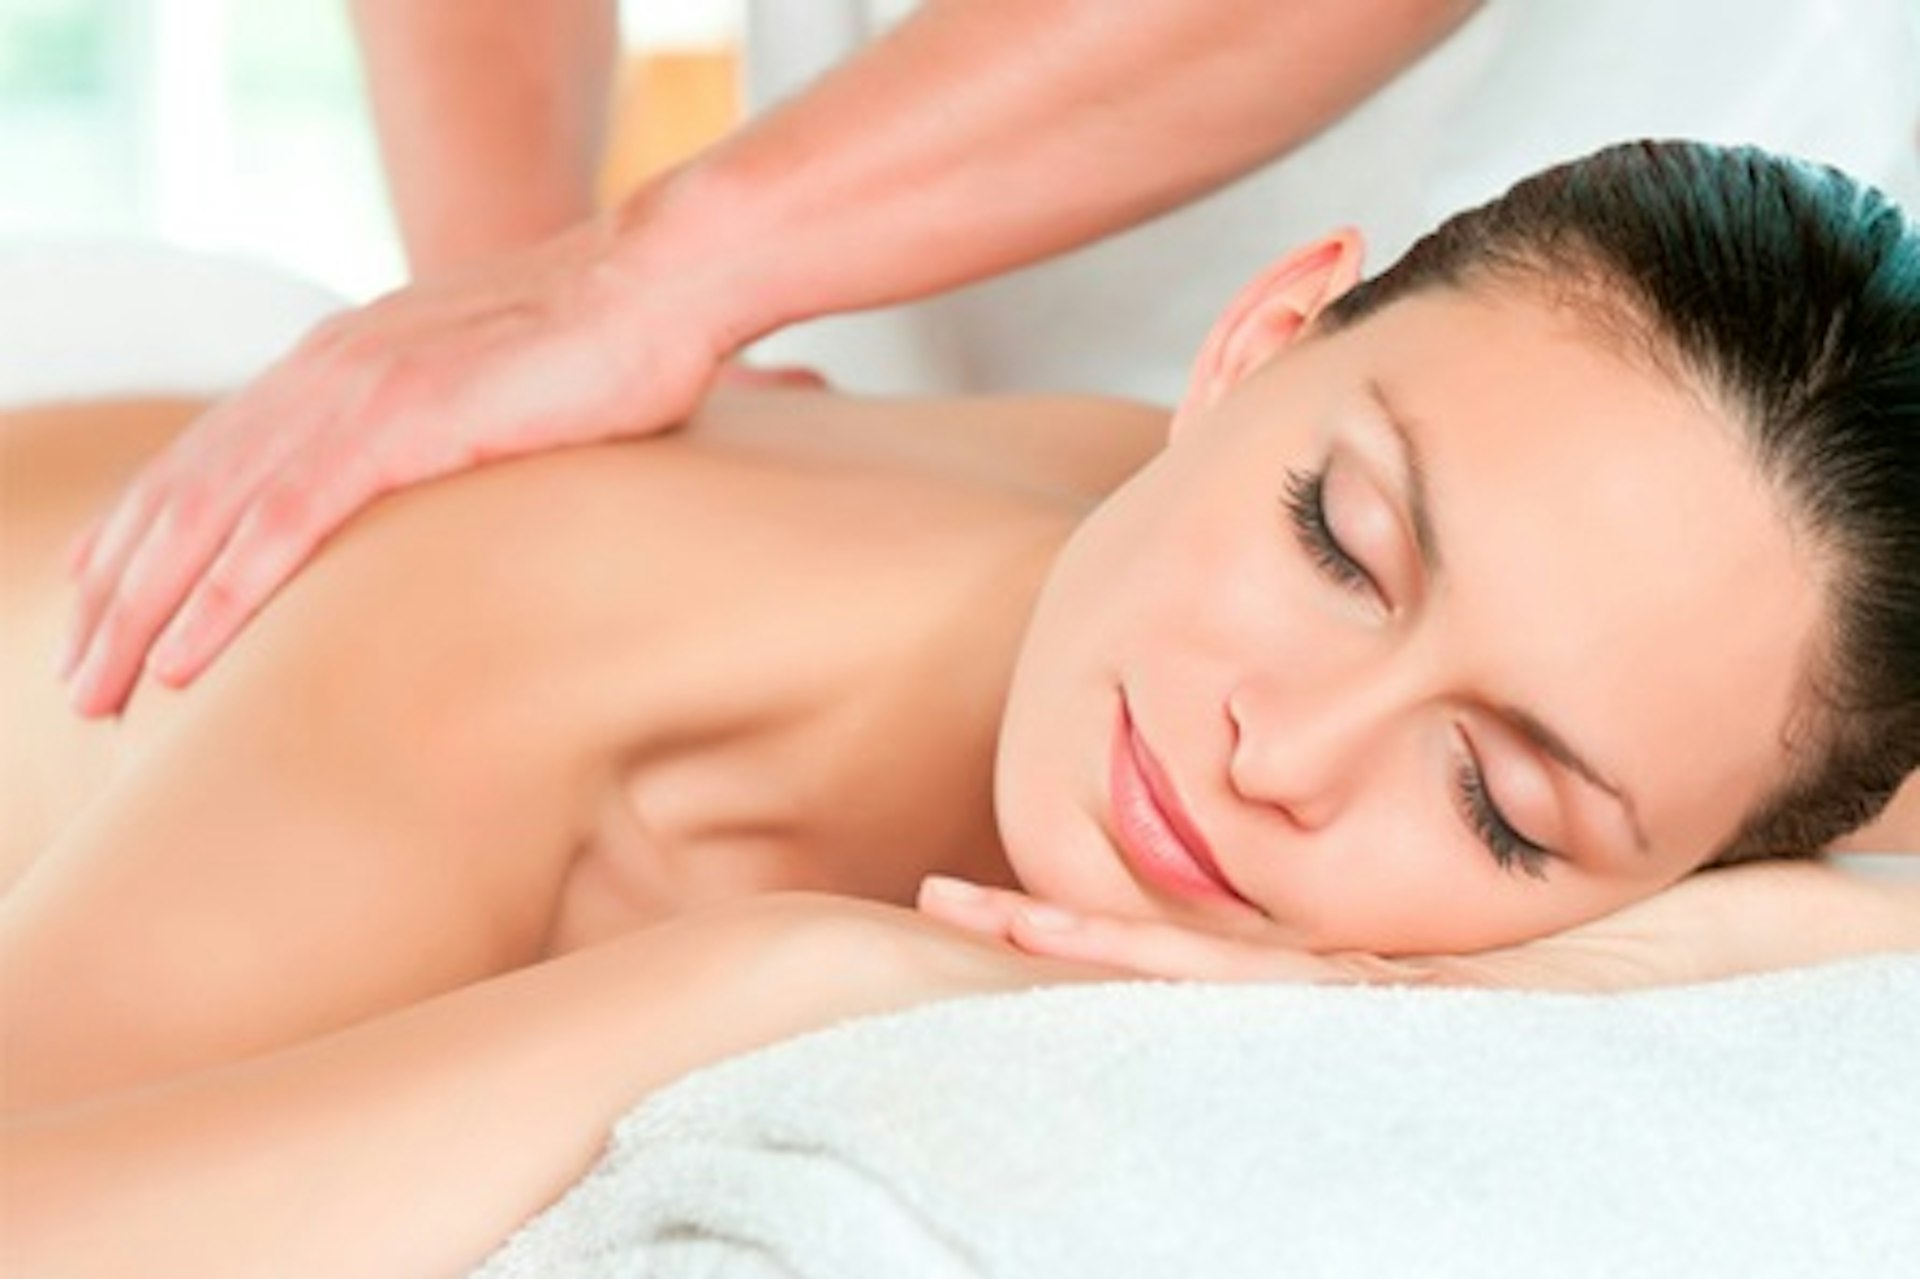 Spa Treat with Mediterranean Body Scrub, Massage and Lunch for Two at The Oxfordshire Hotel & Spa